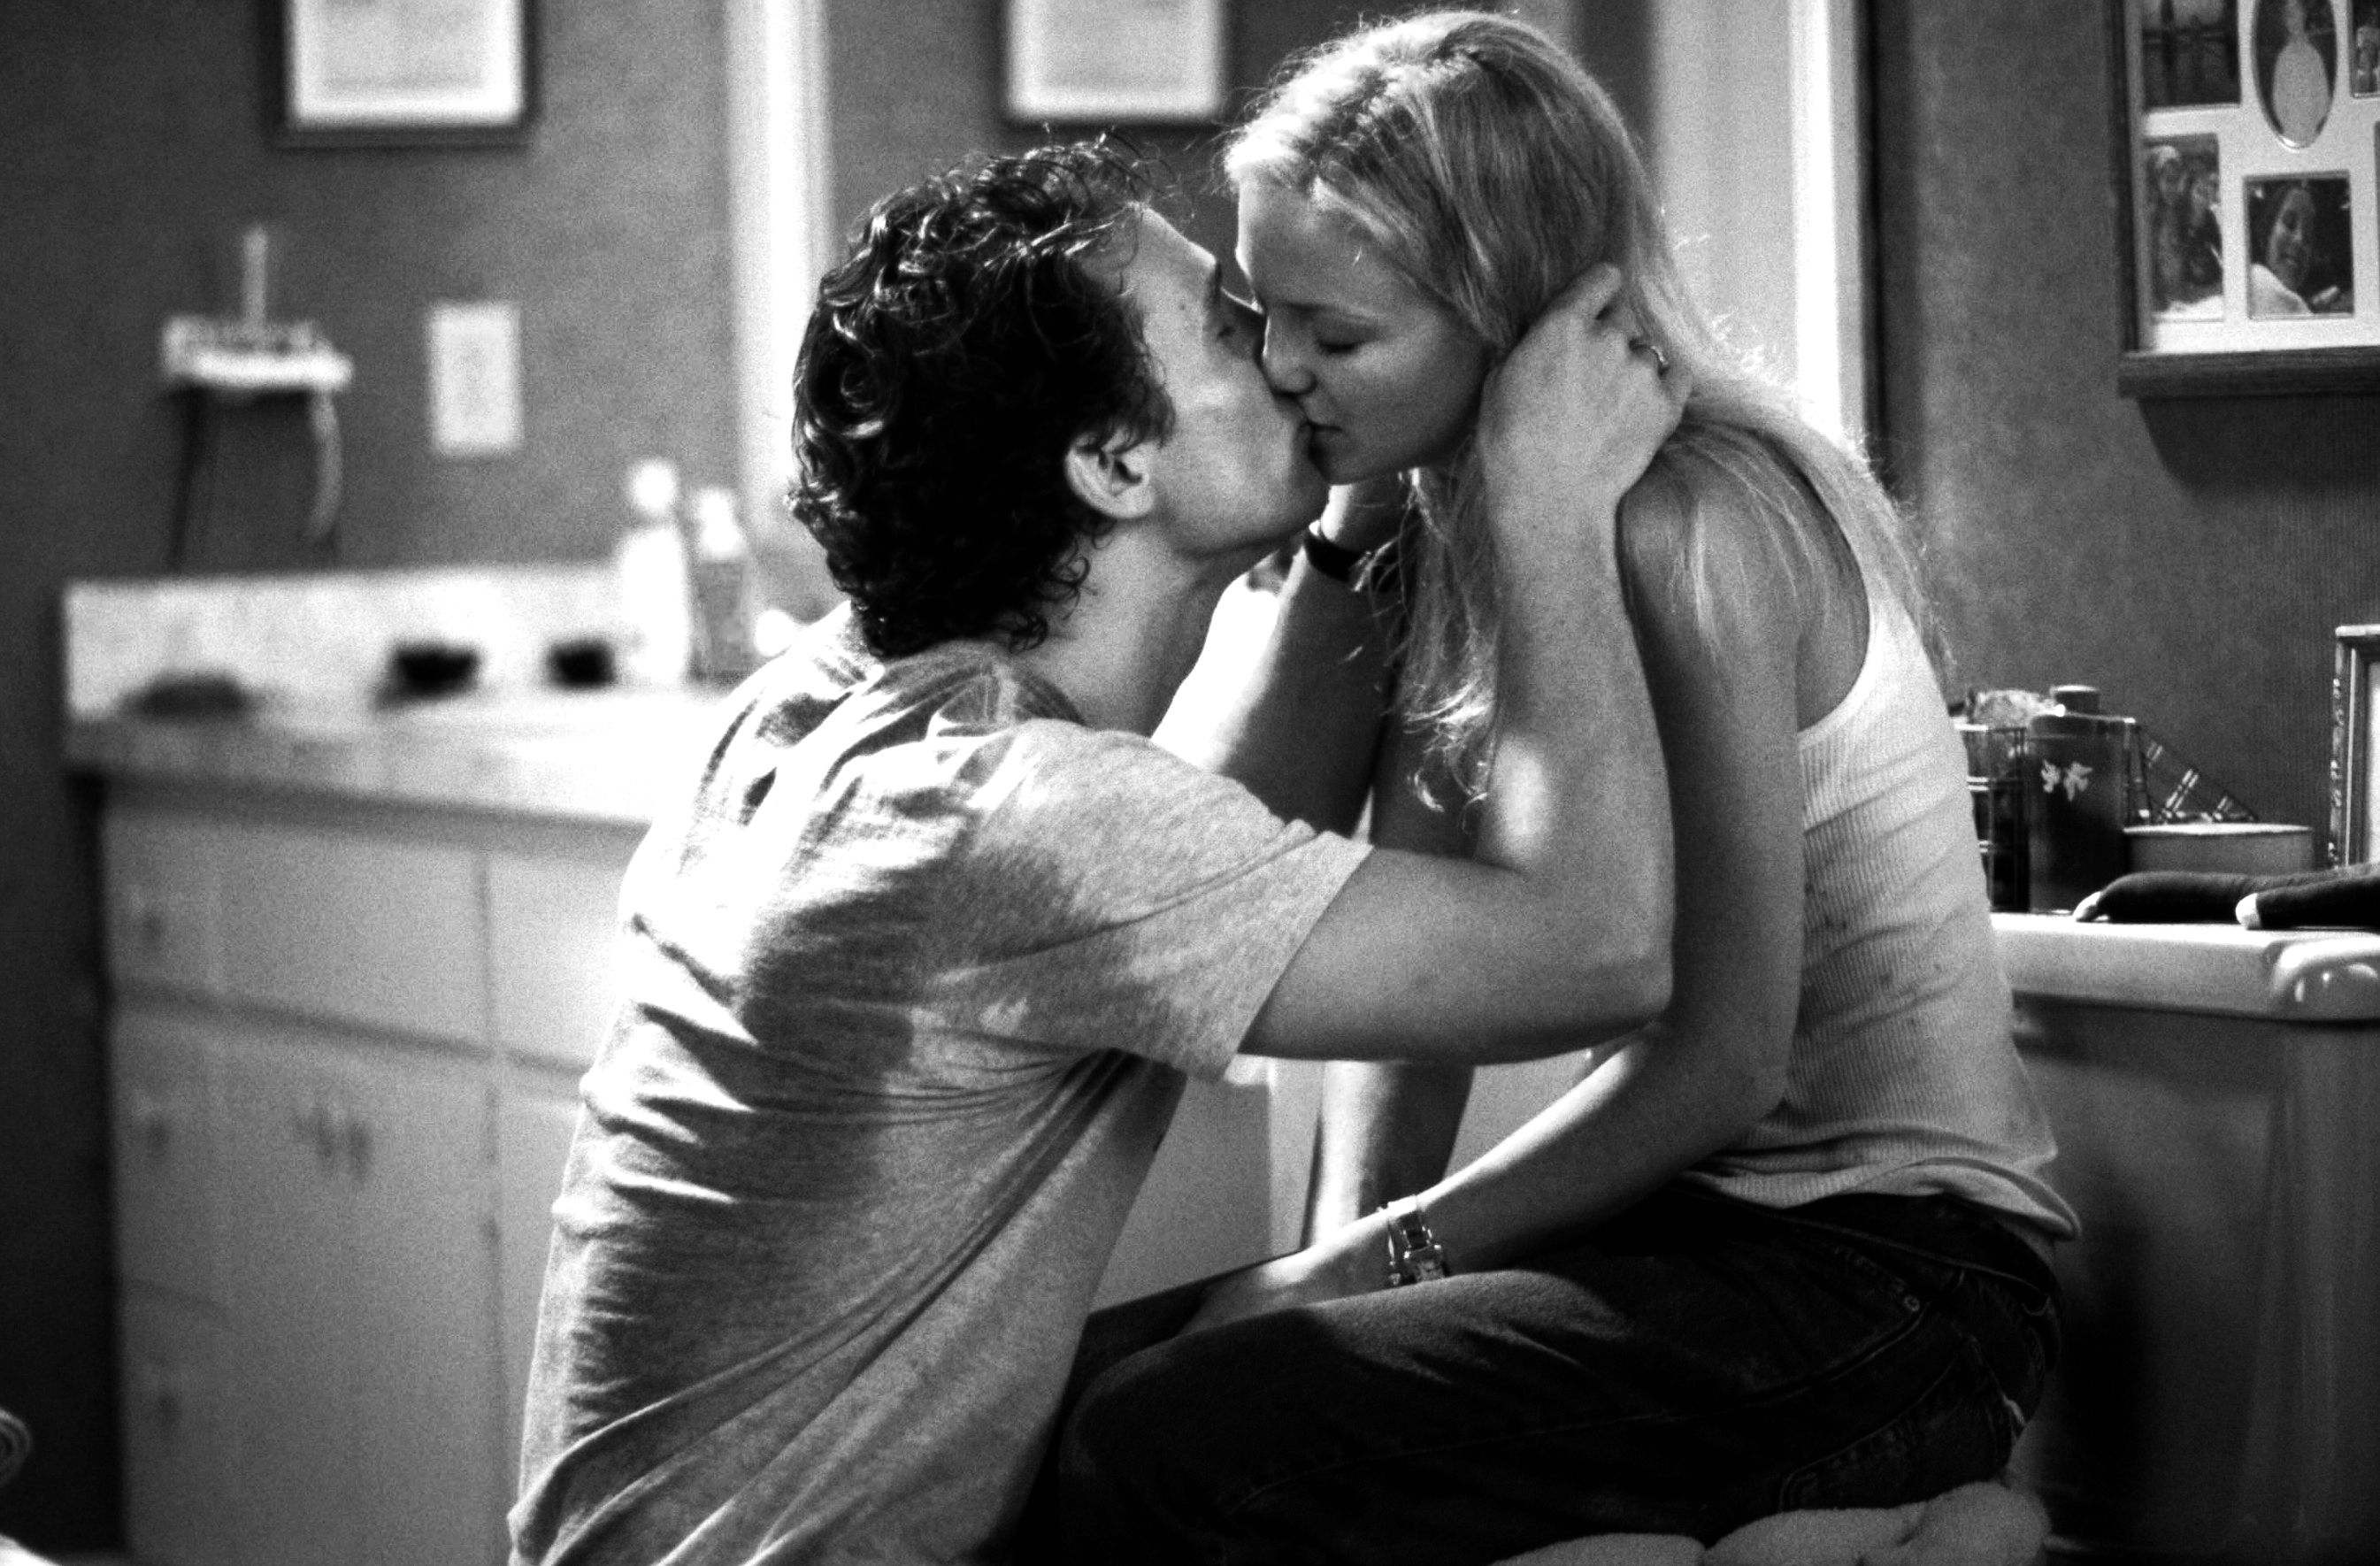 Kising Video 3gp - 50 Sexiest Kisses From Movies - Sexiest Kissing Scenes Ever